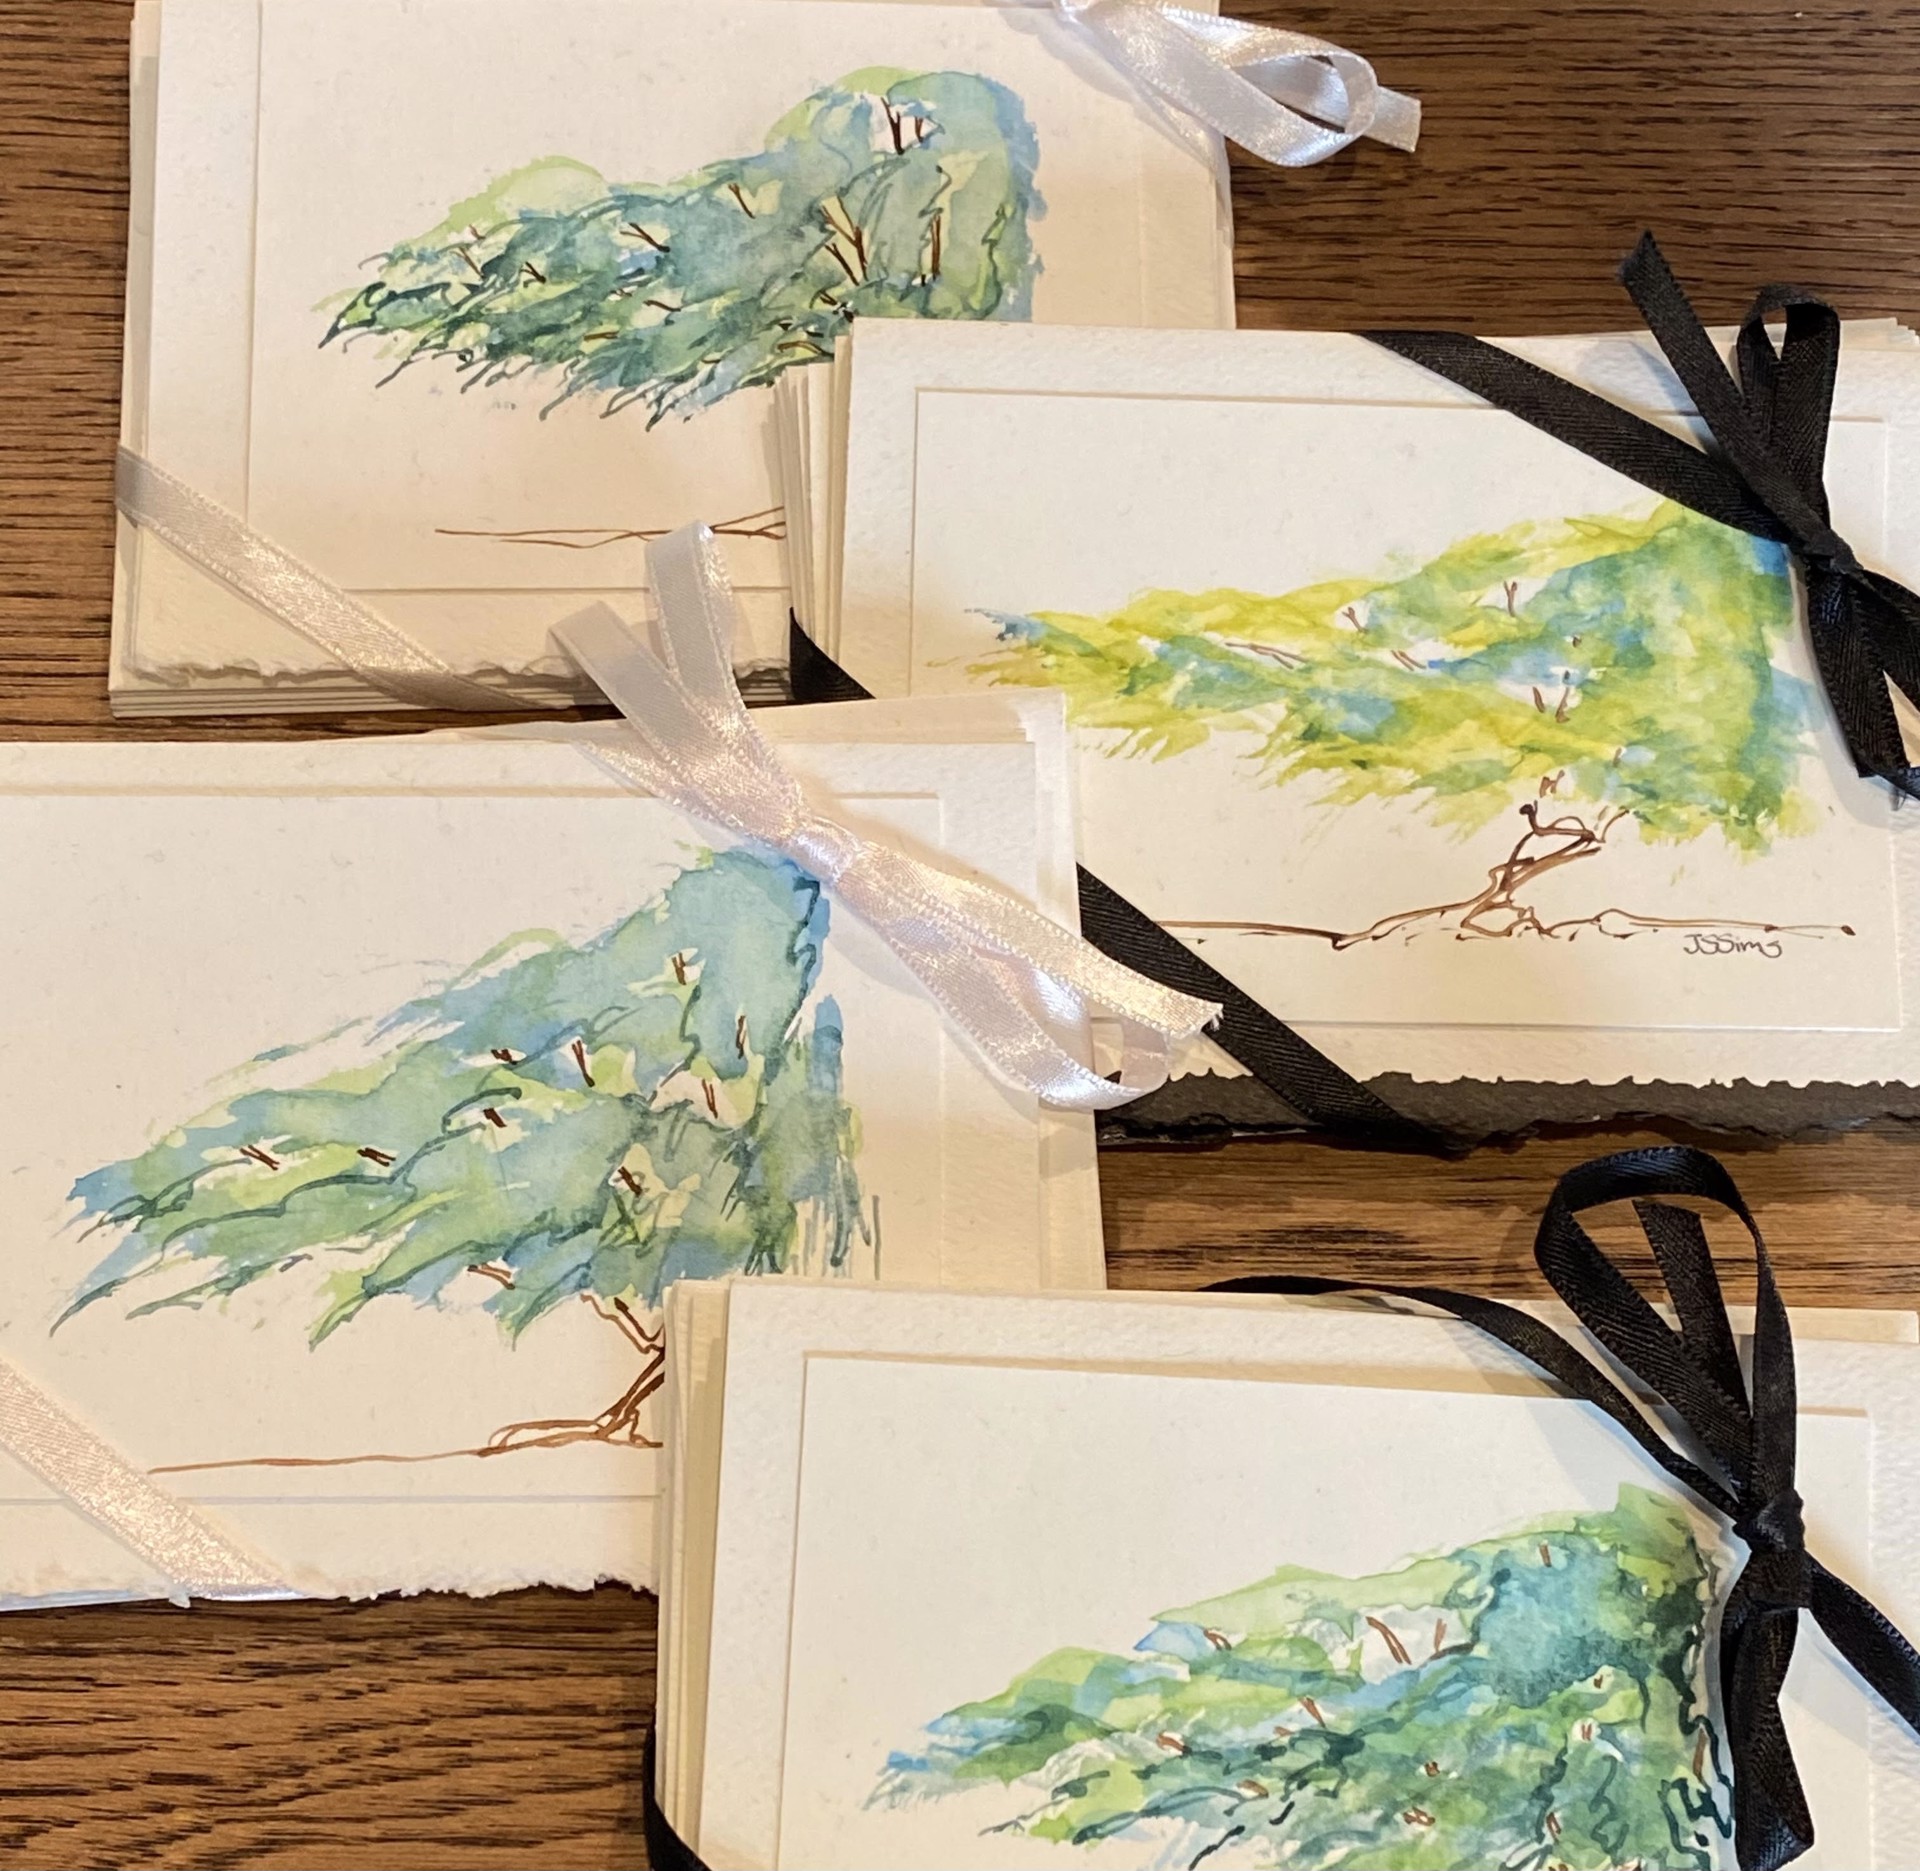 Handpainted Watercolor Note Cards by Janet Sopp-Sims